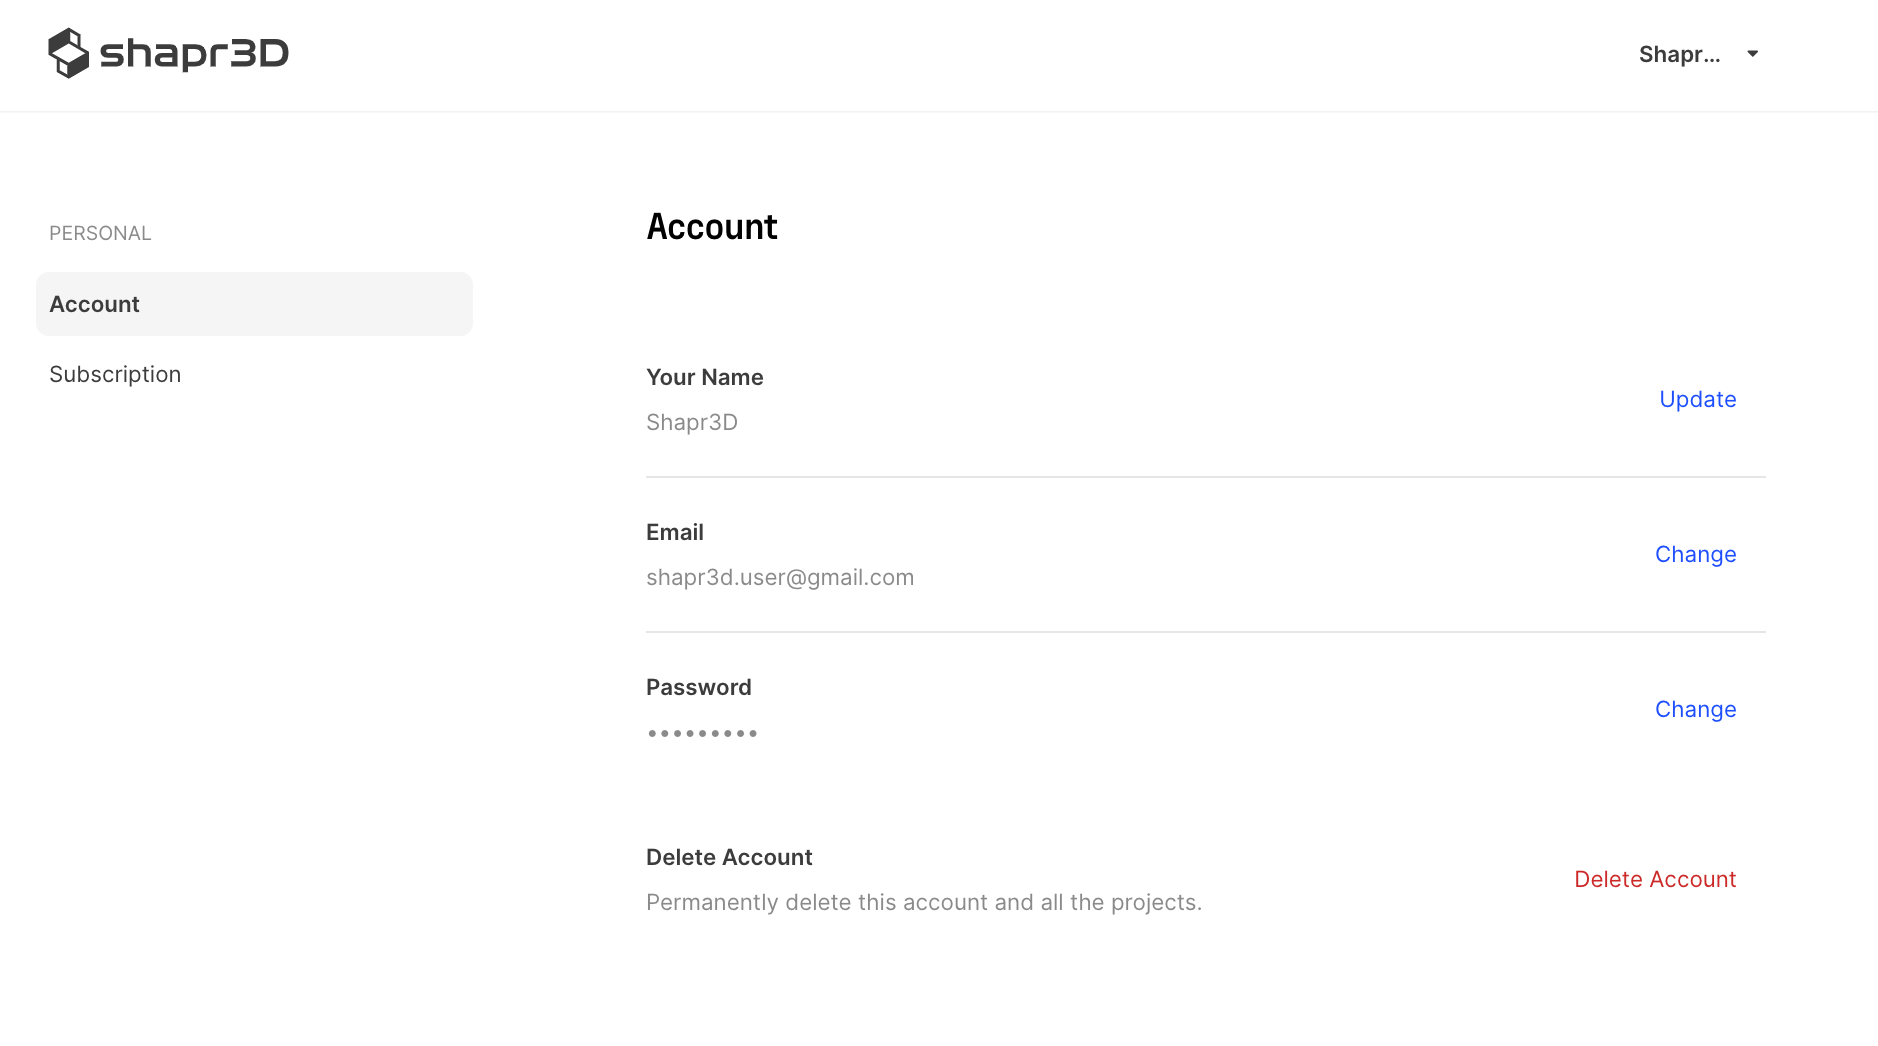 manage-account-page.png